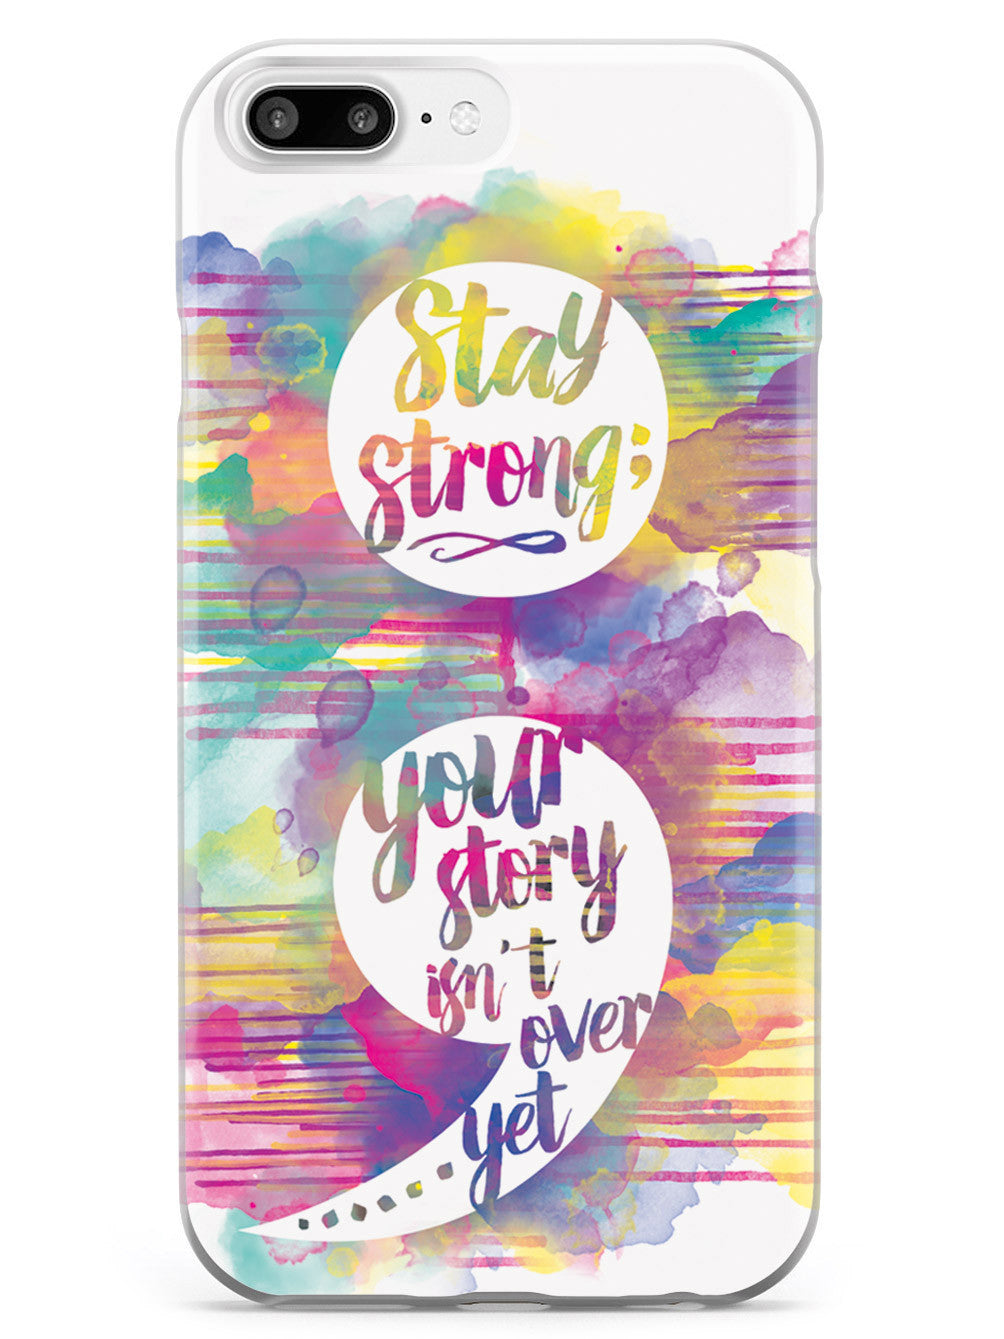 Your Story Isn't Over Yet - Semi Colon Project Case – InspiredCases